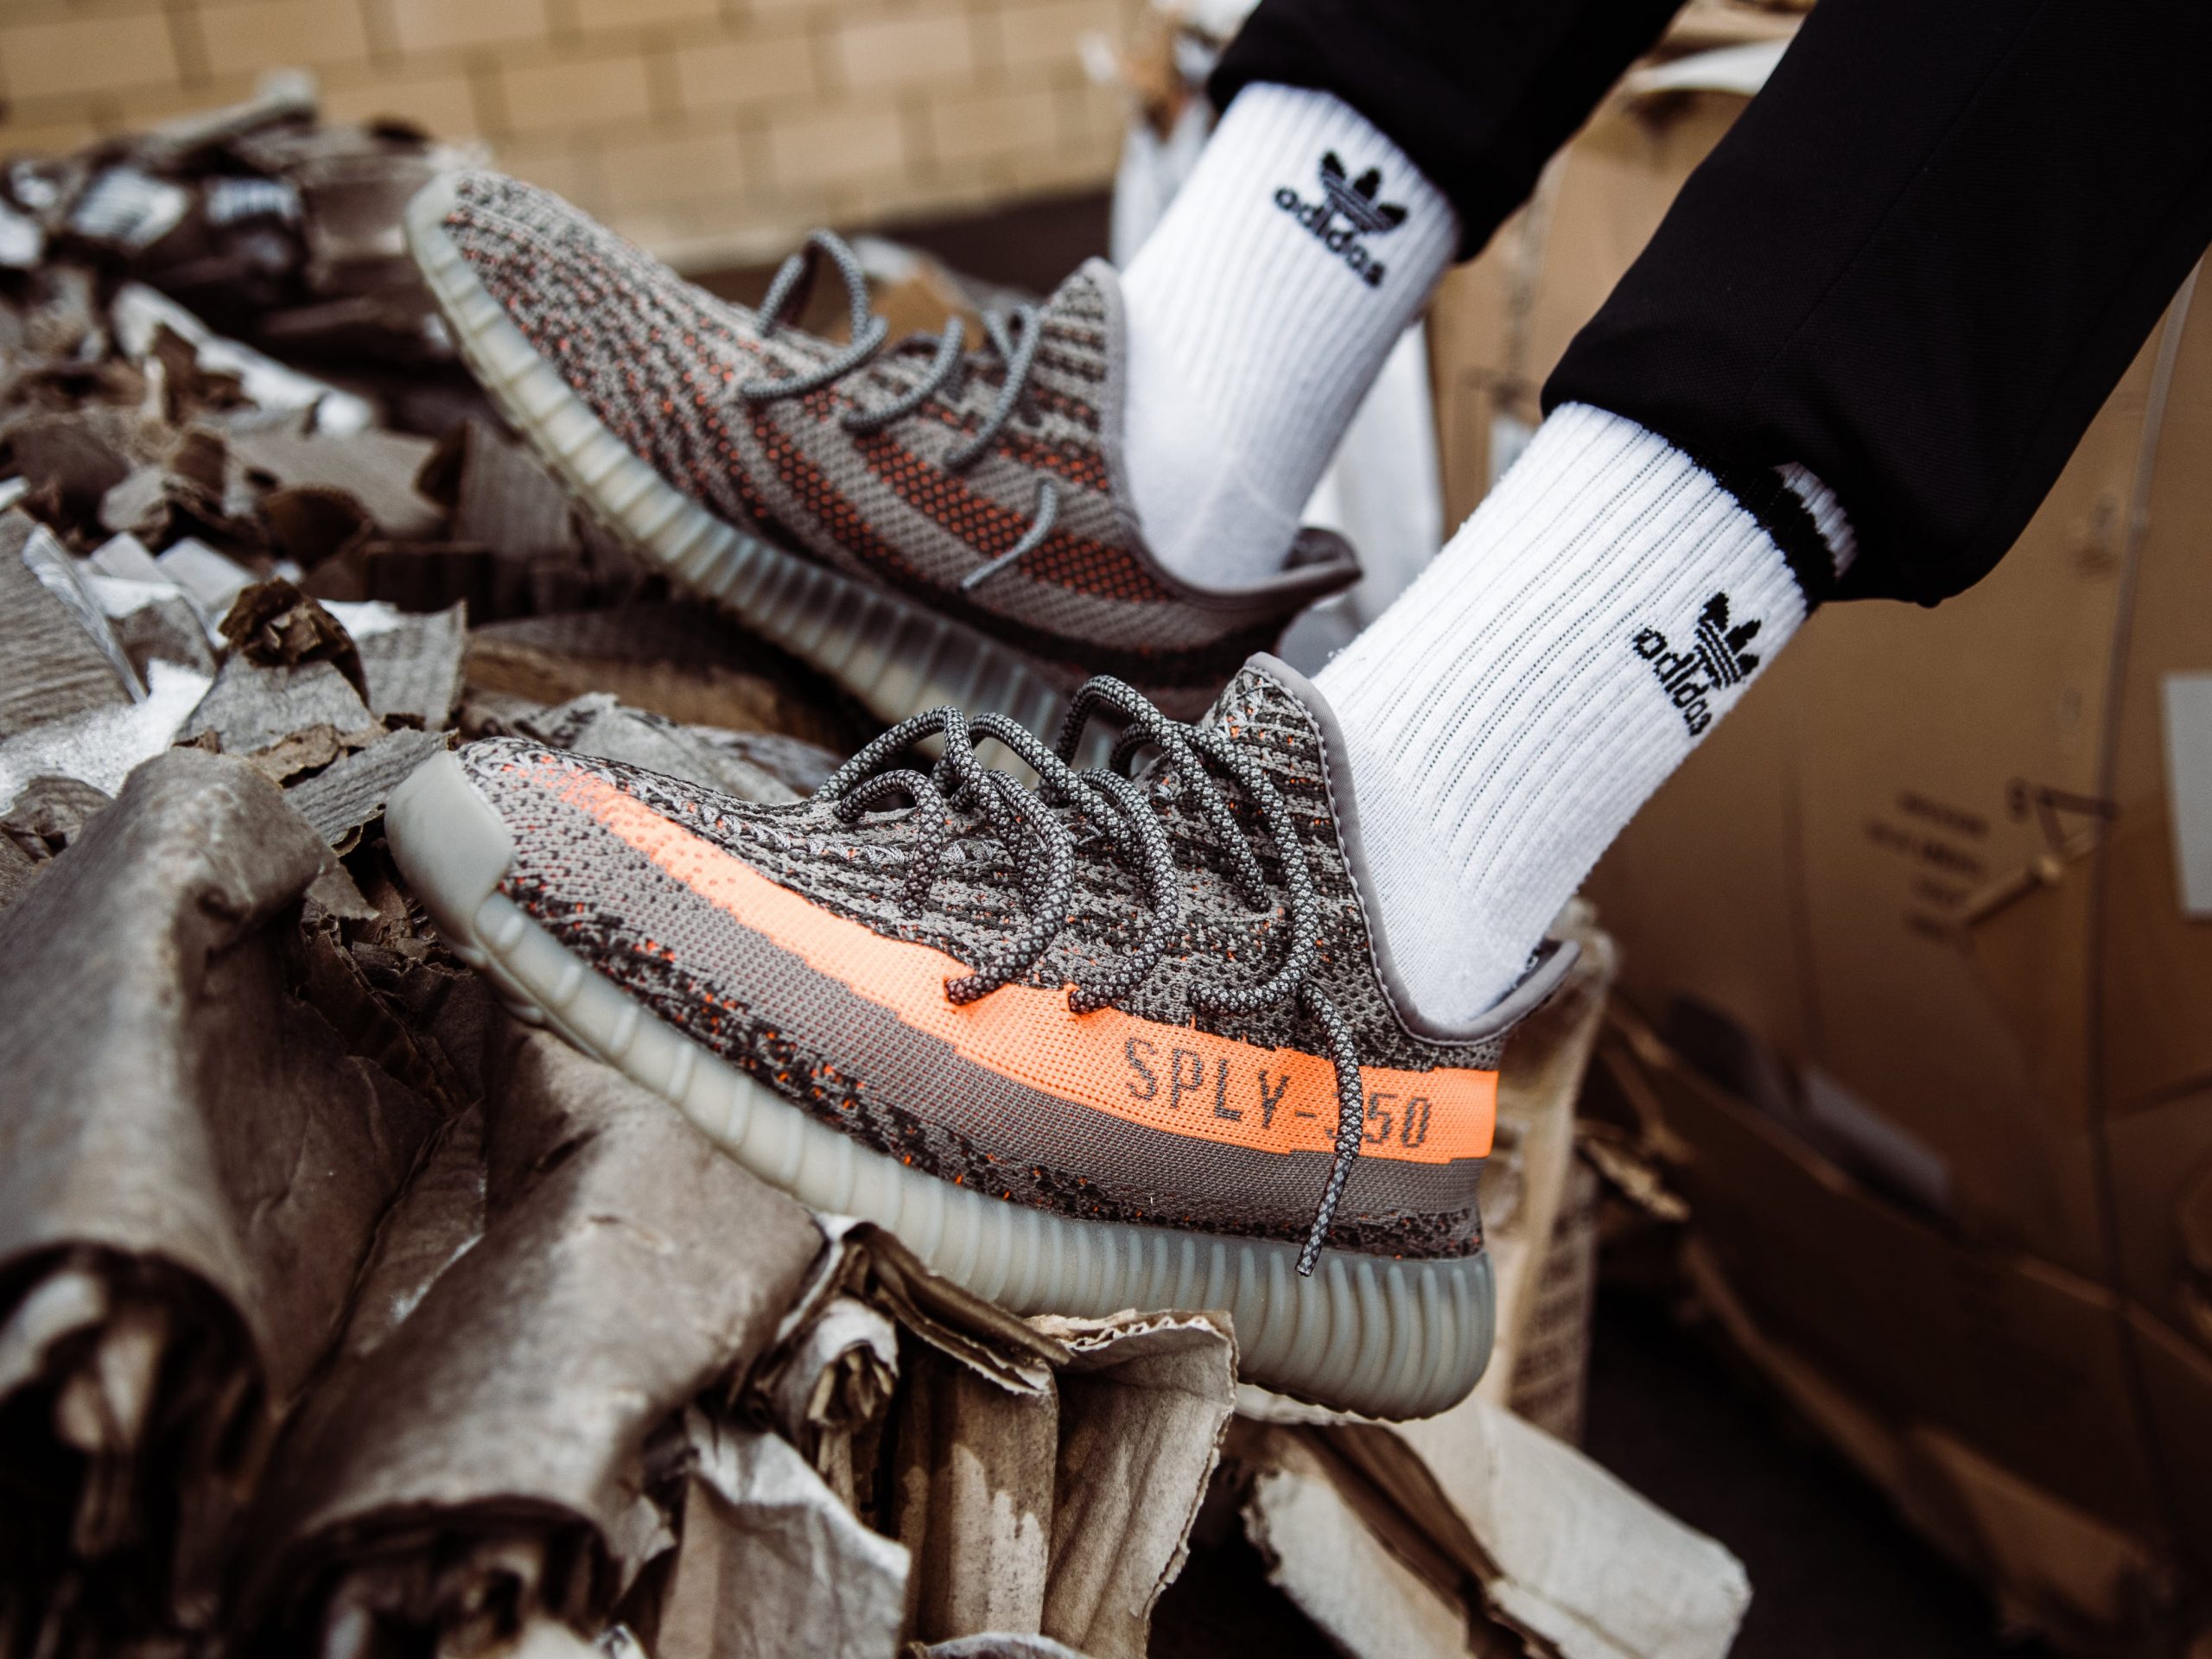 Beluga Adidas Yeezy Boost 350 V2 shoes wallpaper, person wearing orange Yeezy Boost 350 v2 sneakers